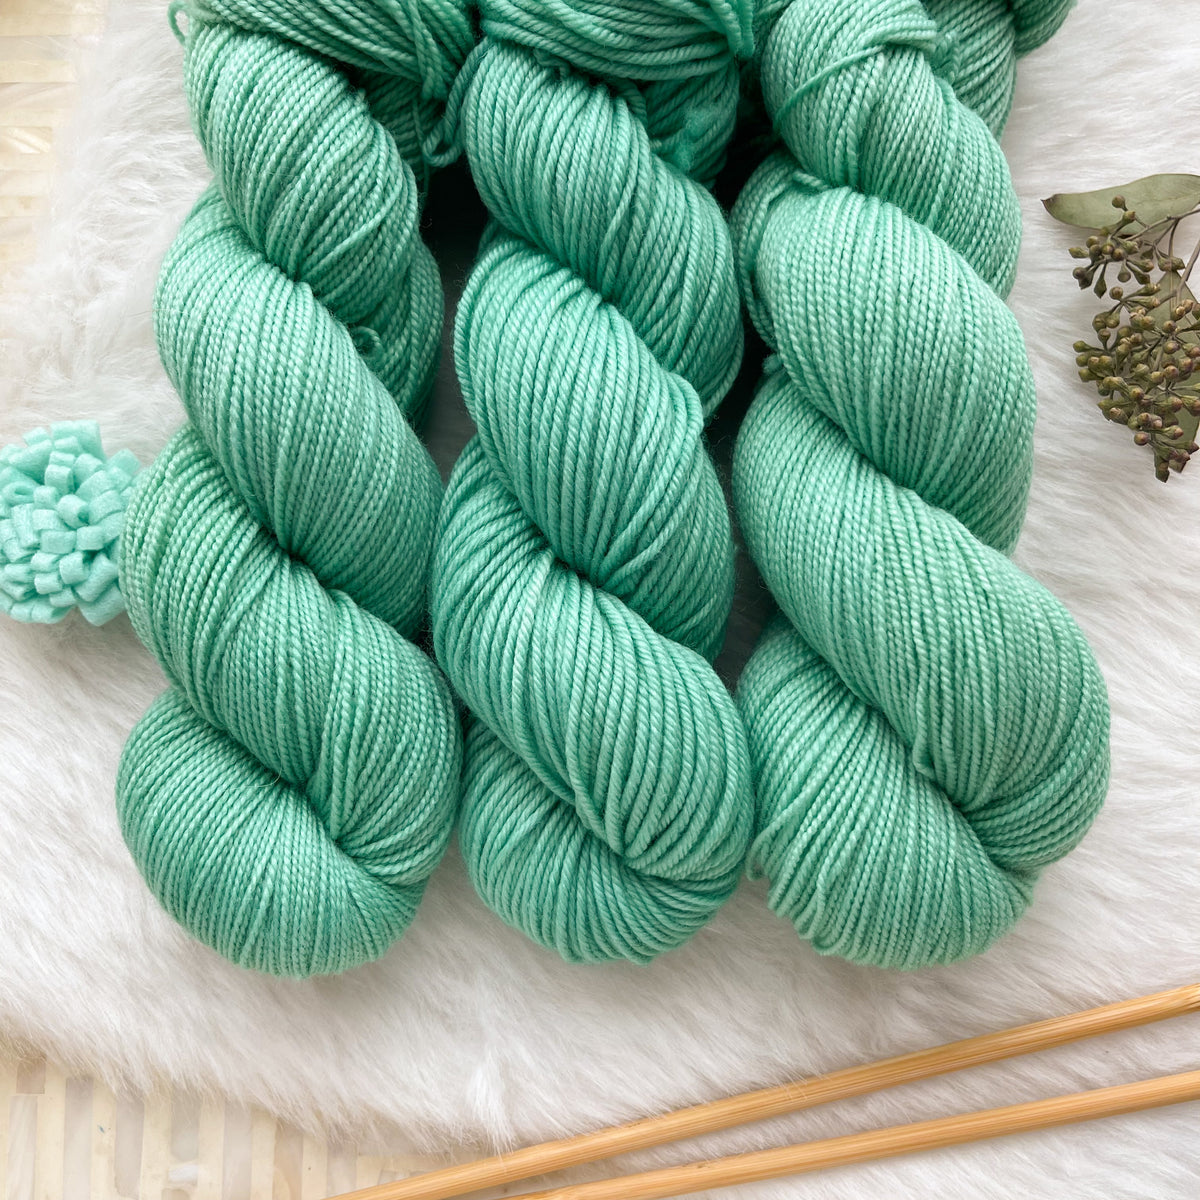 SEA FOAM - Dyed to Order - Hand Dyed Yarn Skein